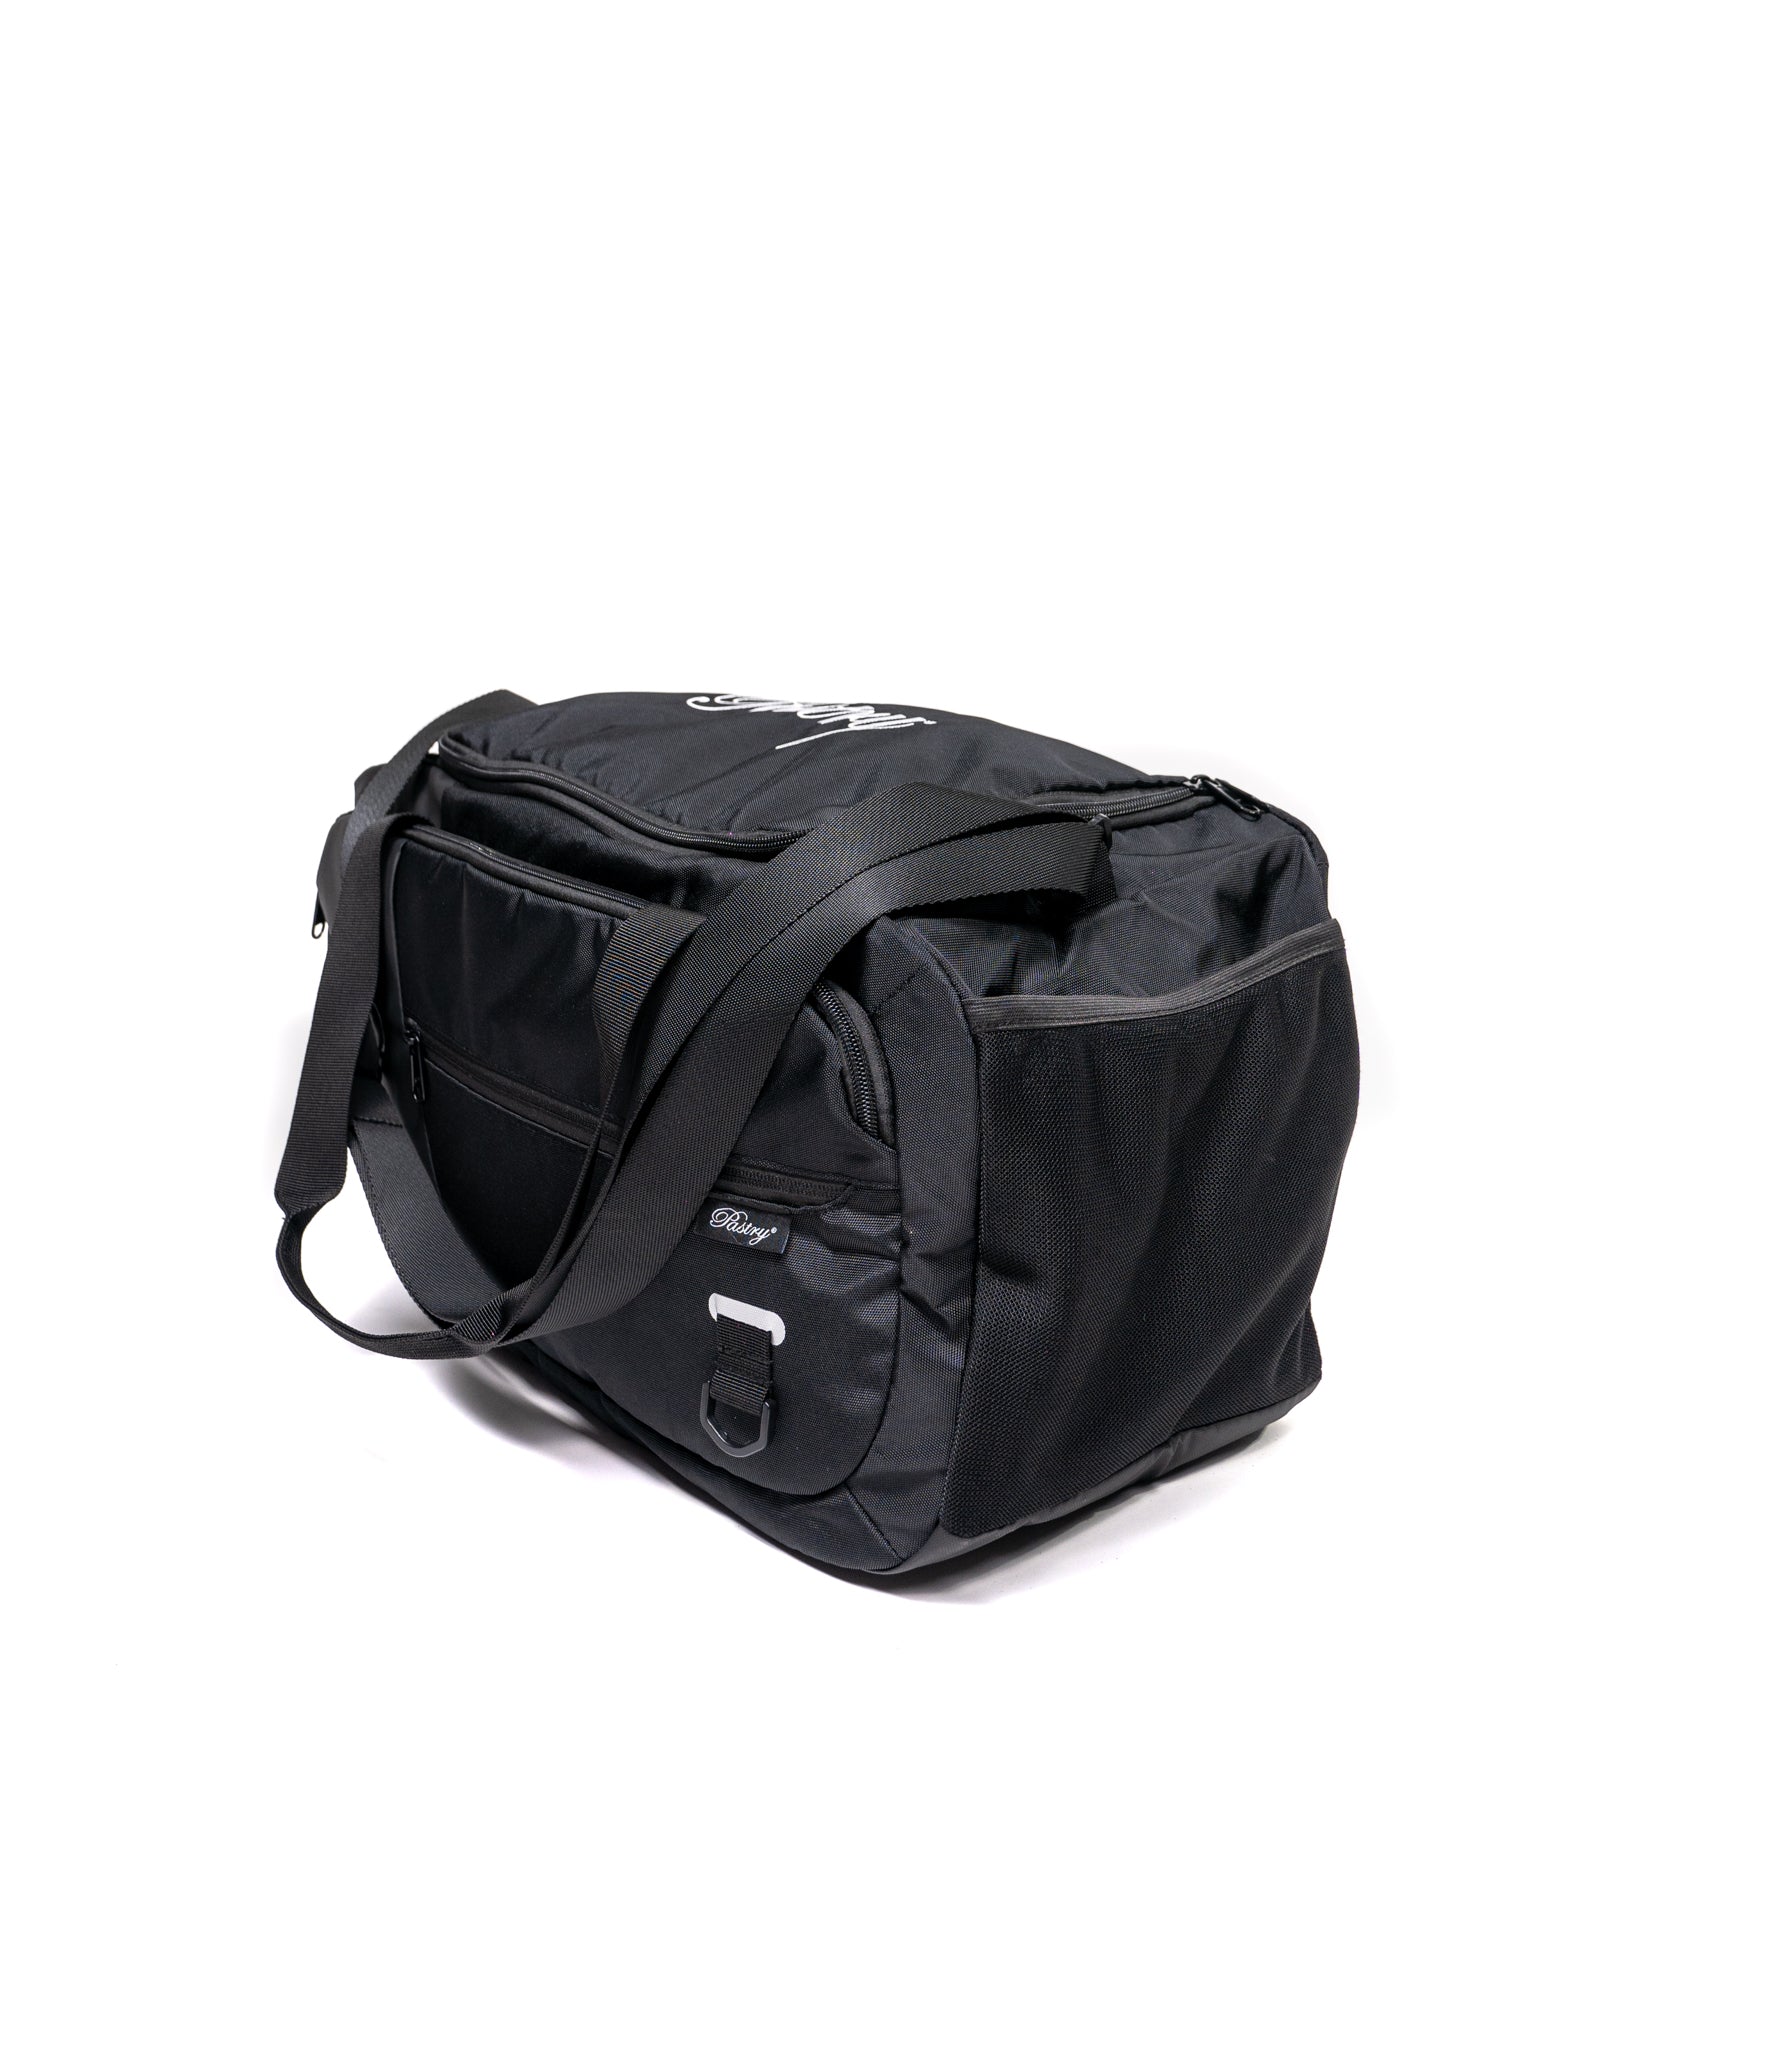 Pastry Duffle Bag Solid Black 3 quarter view